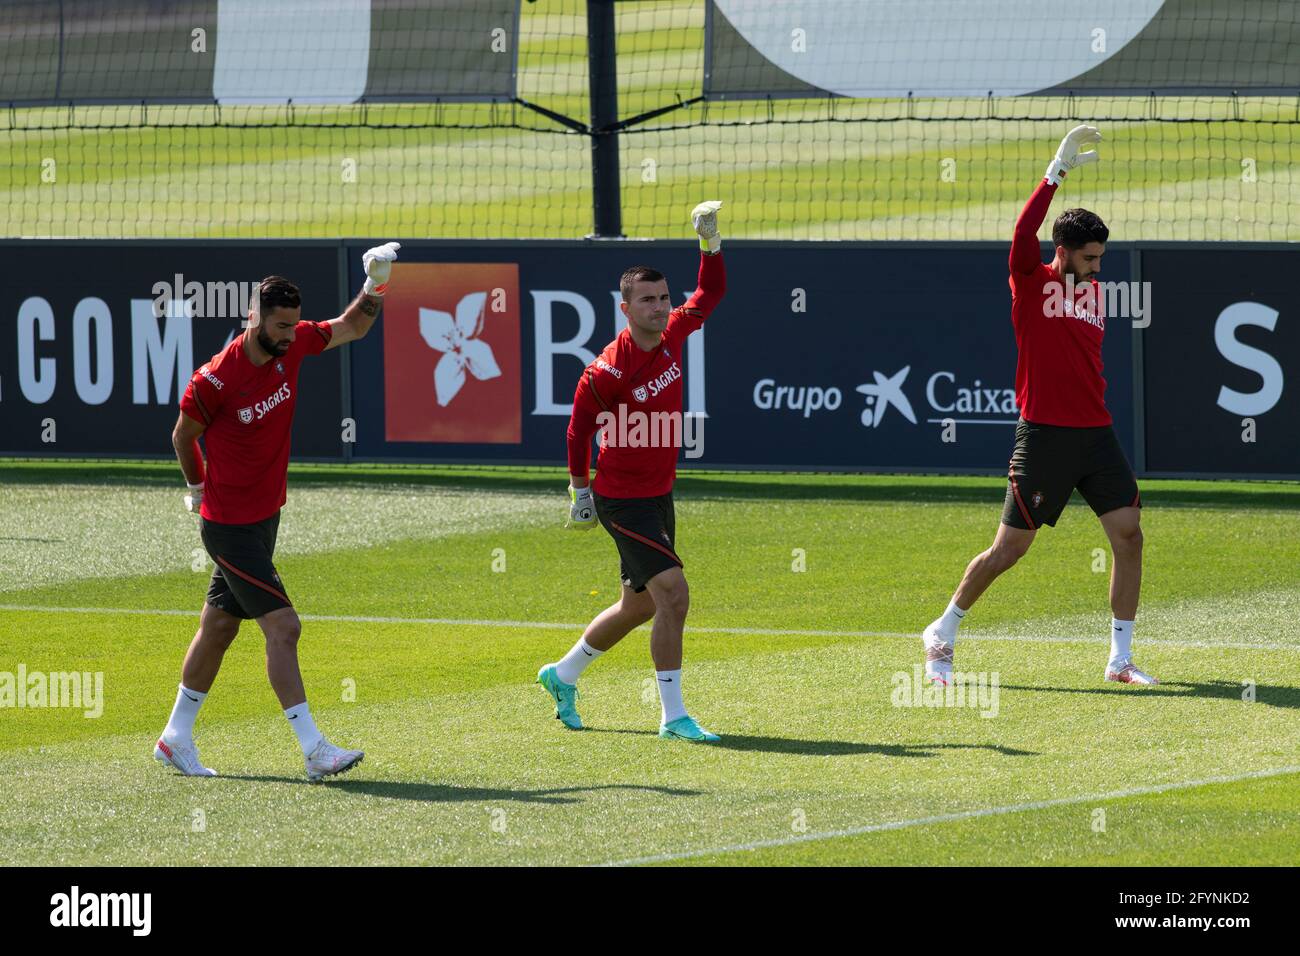 Oeiras, Portugal. 29th May, 2021. Goalkeepers Rui Patricio (L), Anthony Lopes (C) and Rui Silva (R) of Portugal seen in action during the training session at Cidade do Futebol training ground in Oeiras.Portugal football team trains before competing in the European football championship - EURO 2020 - scheduled to start on June 11th. (Photo by Hugo Amaral/SOPA Images/Sipa USA) Credit: Sipa USA/Alamy Live News Stock Photo